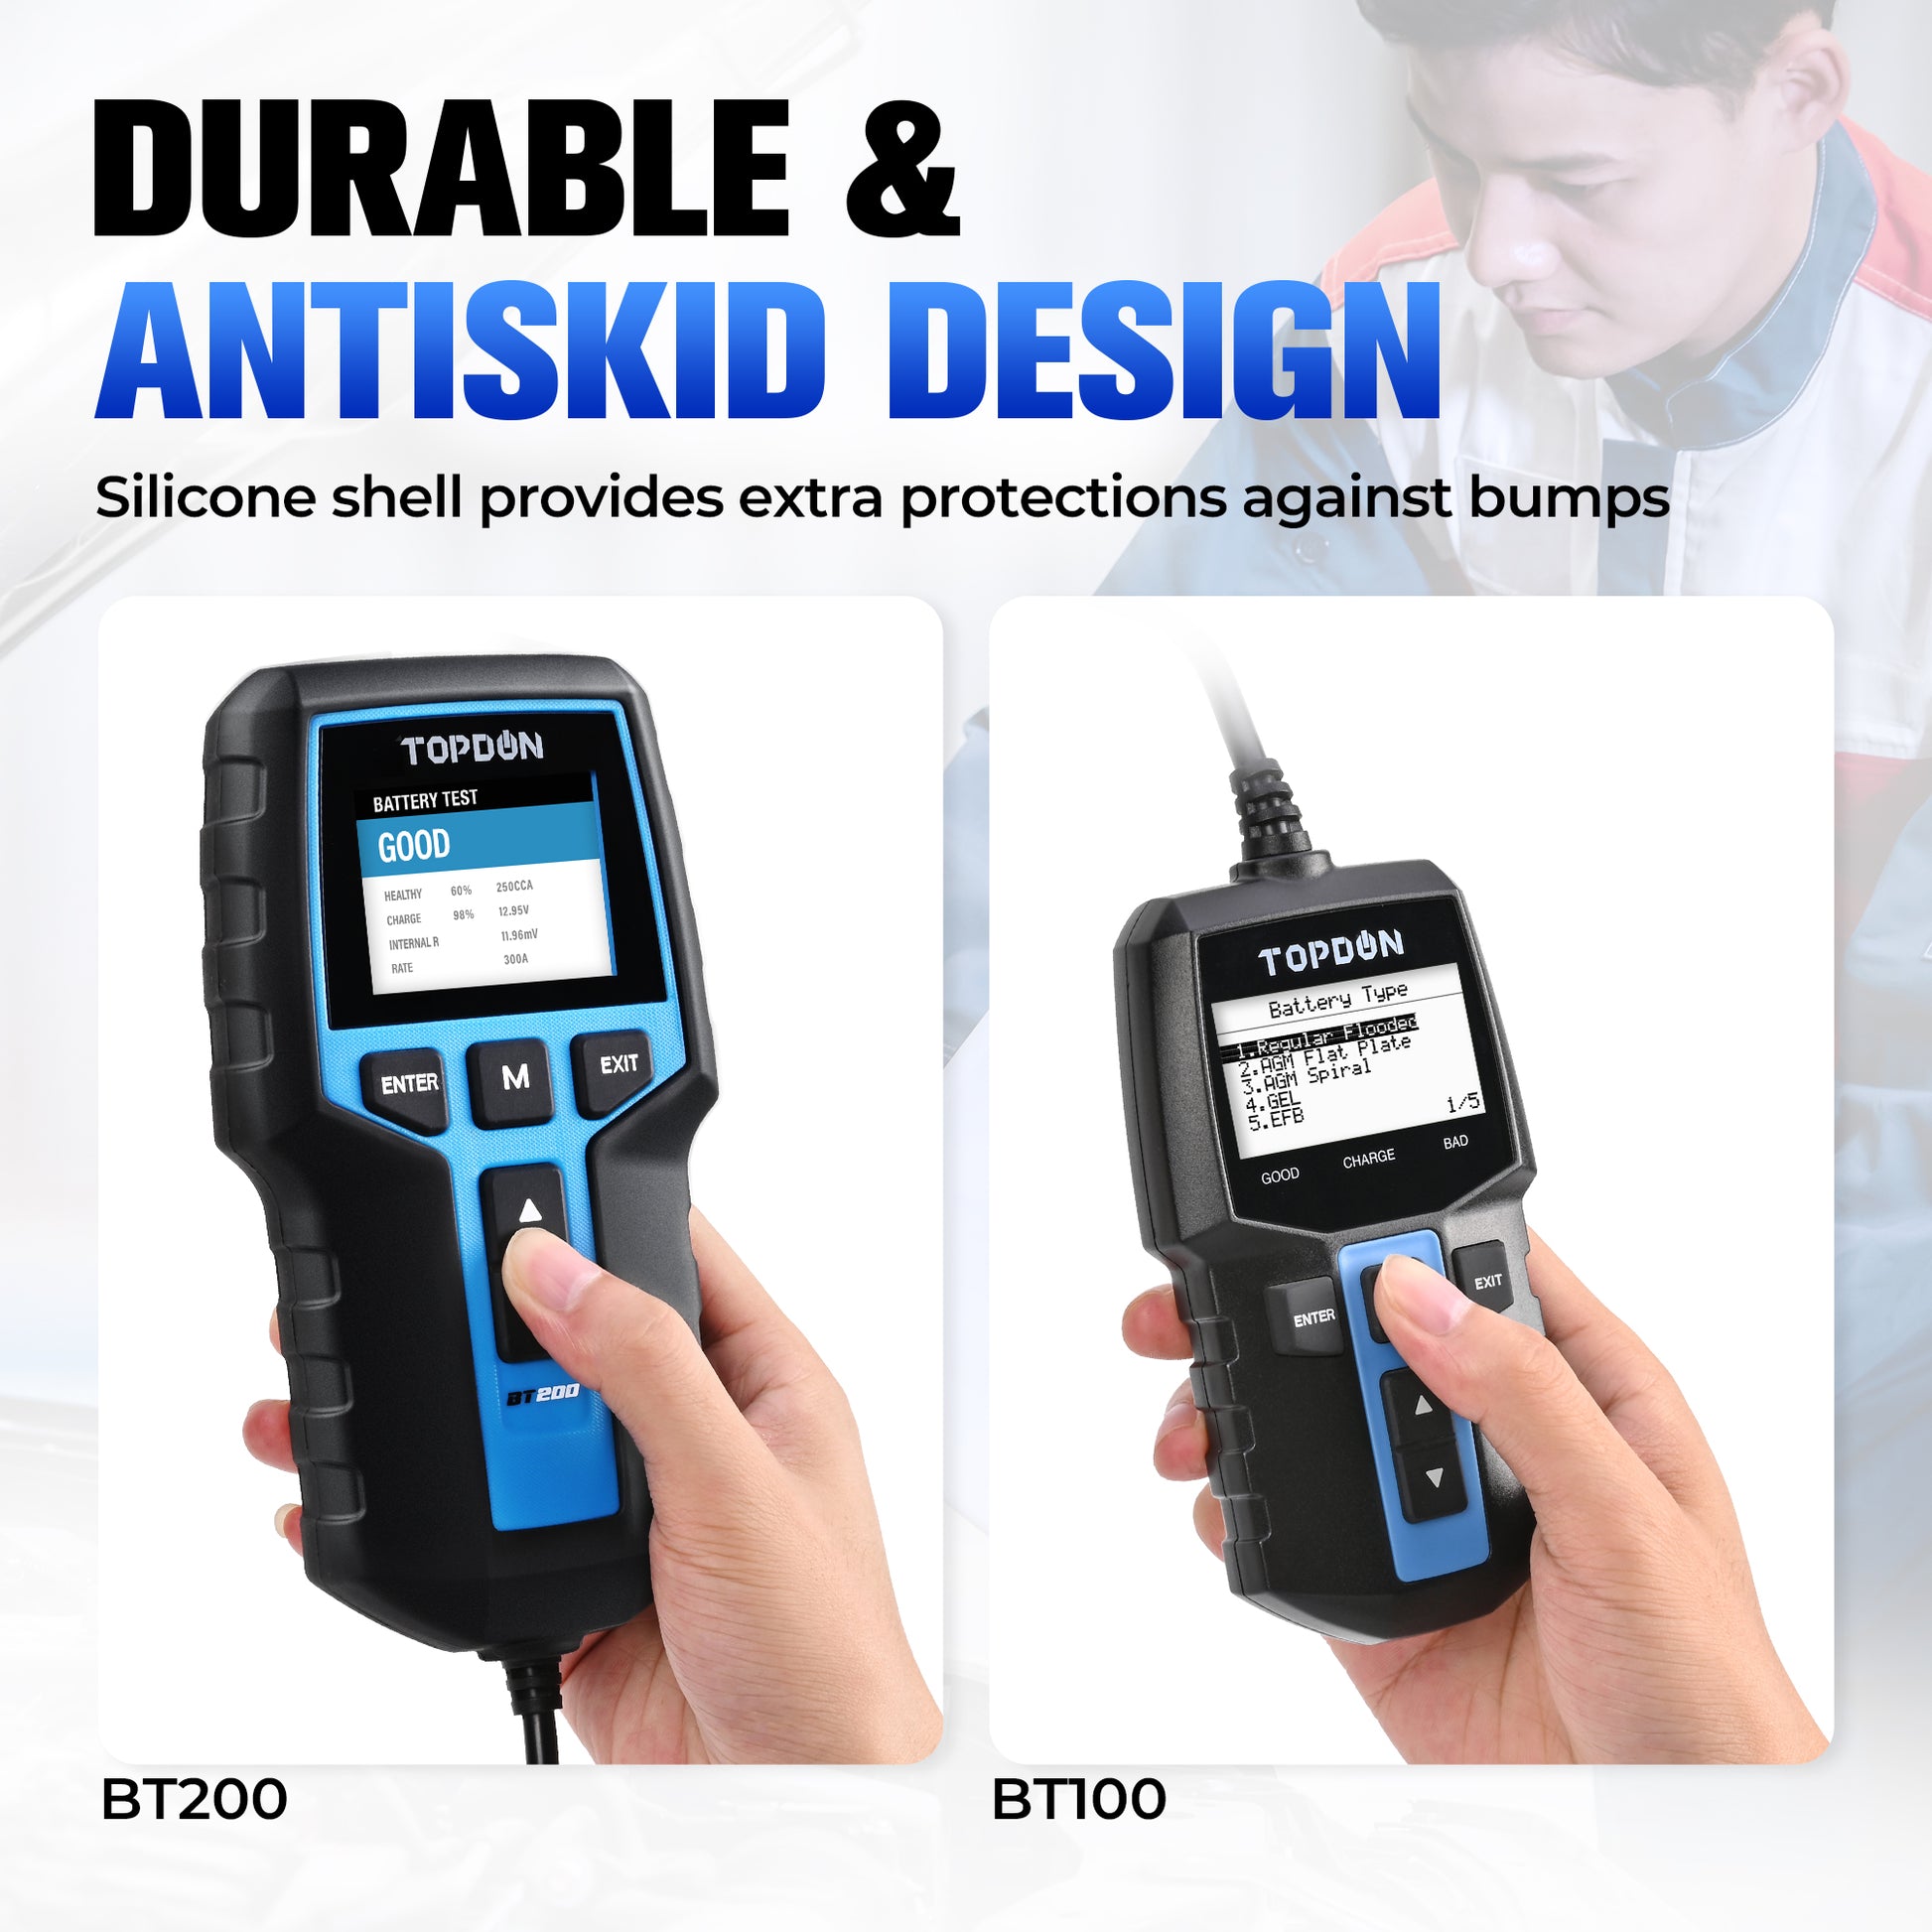 TOPDON Efficient And Accurate Battery Tester